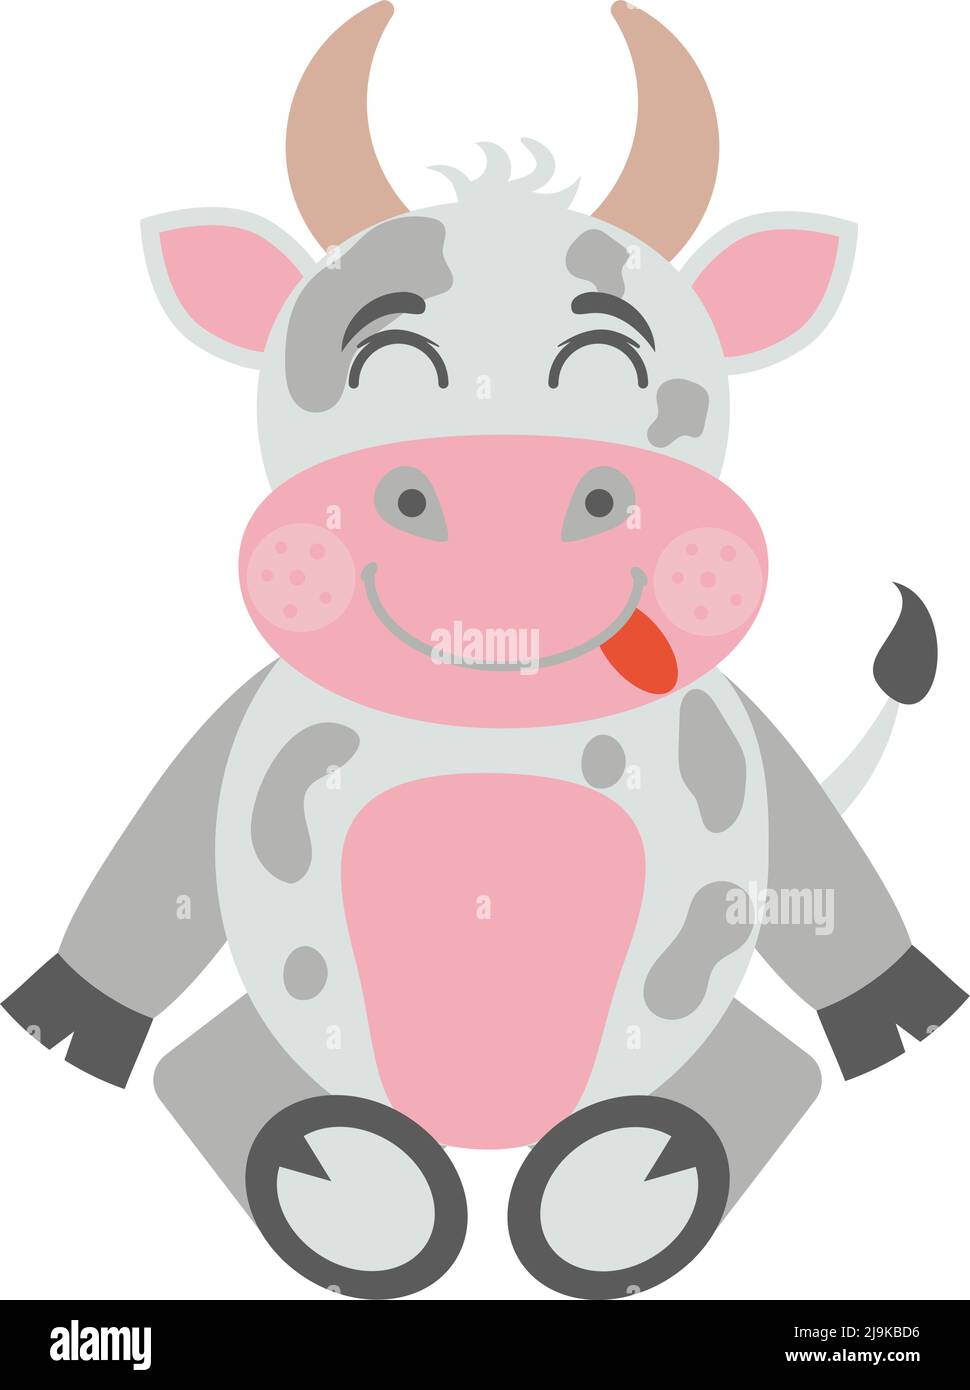 Kawaii adorable cute isolated cow black and white baby illustration cartoon  drawing isolated Illustration Stock